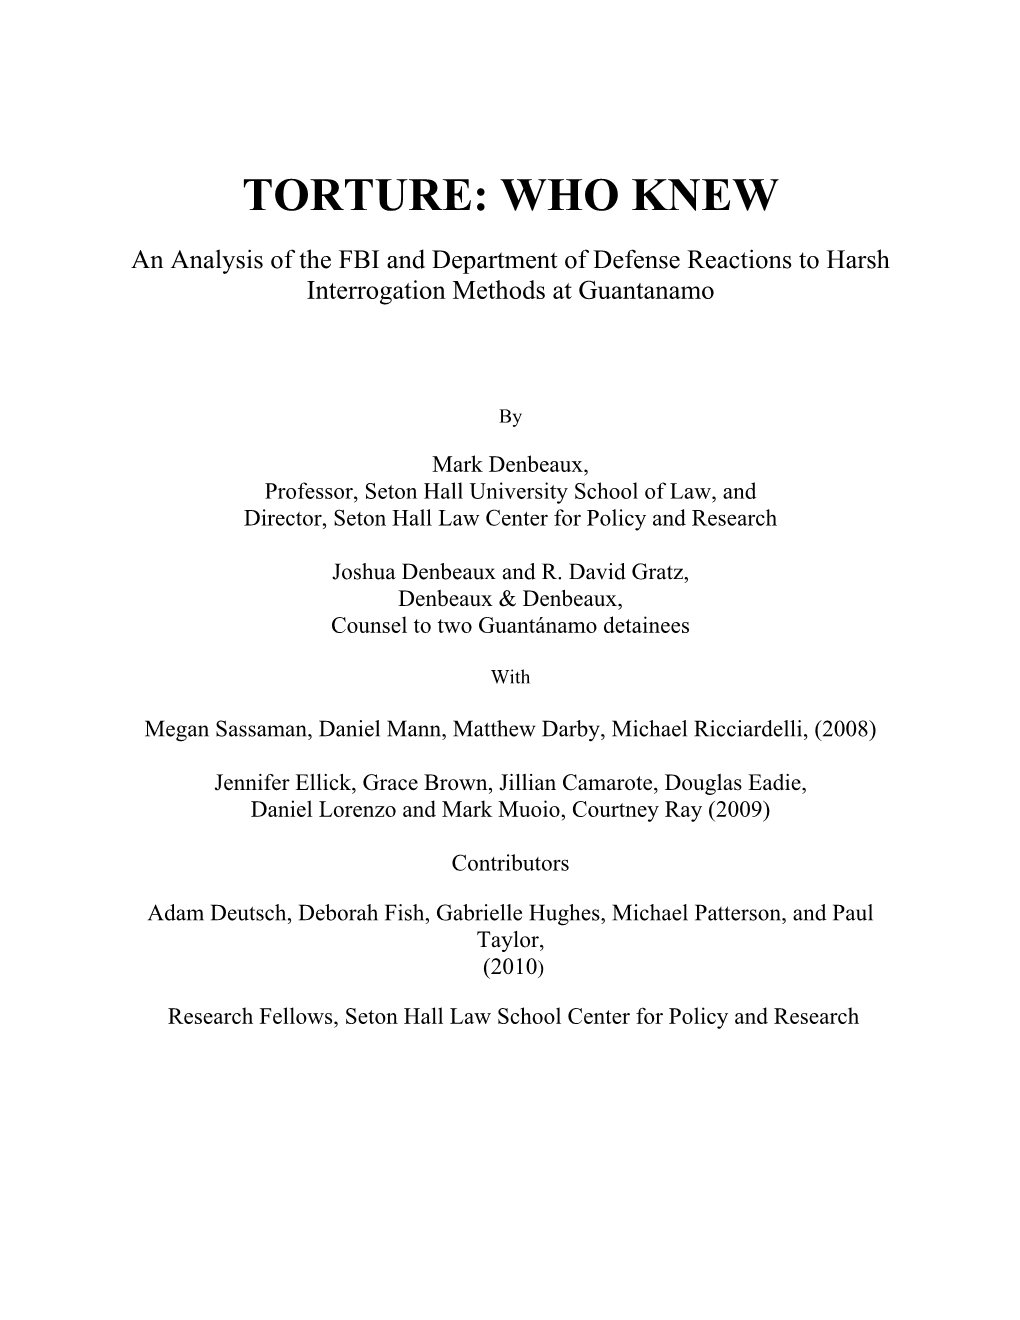 Torture: Who Knew